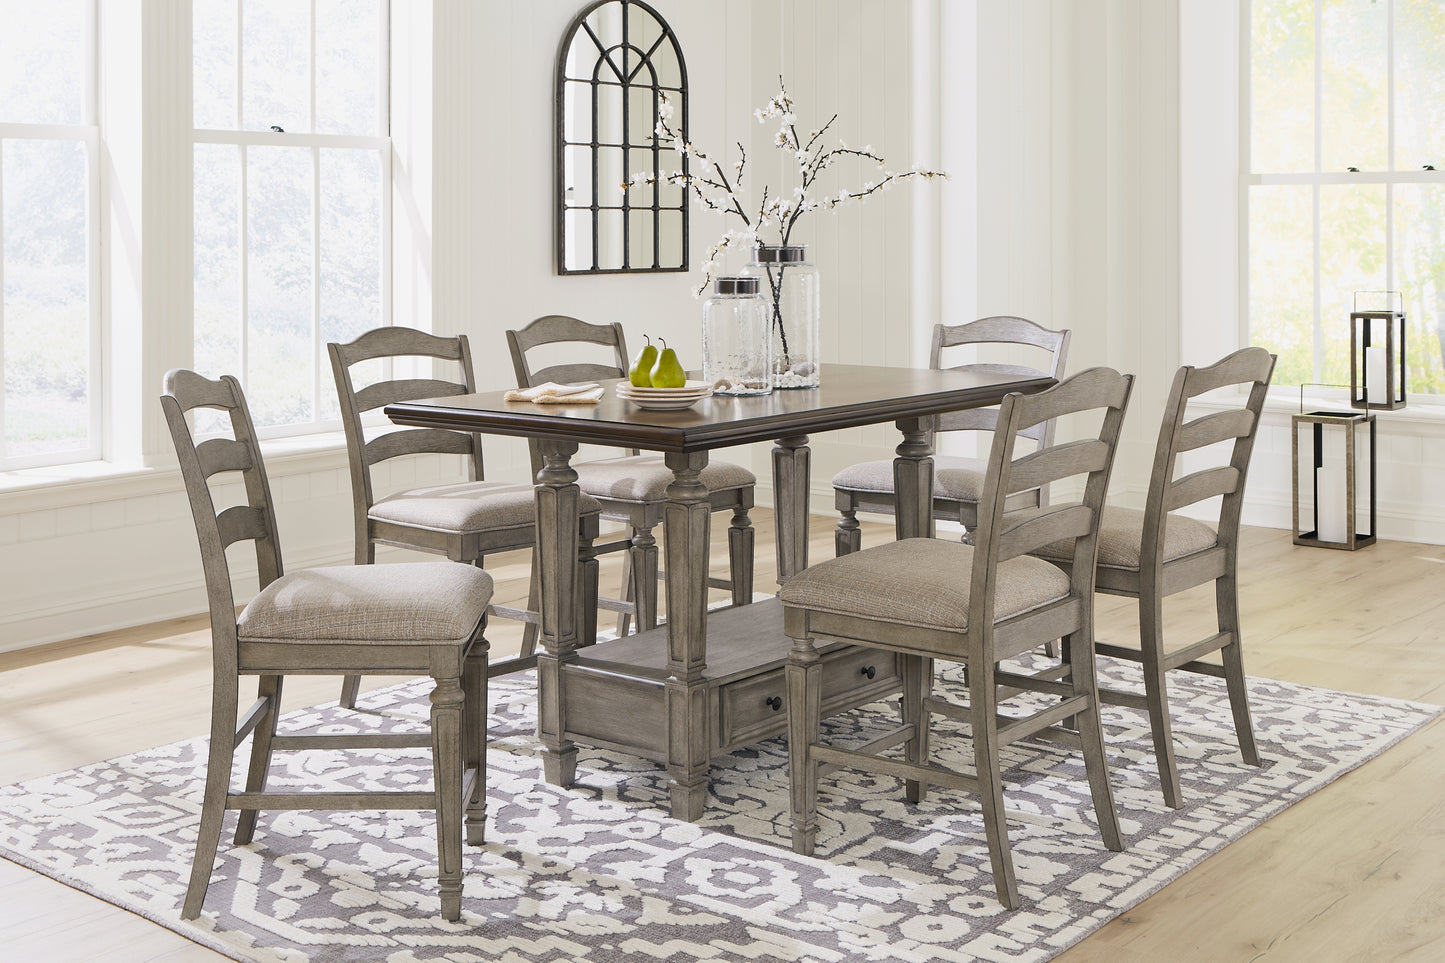 Lodenbay Counter Height Dining Table and 6 Barstools